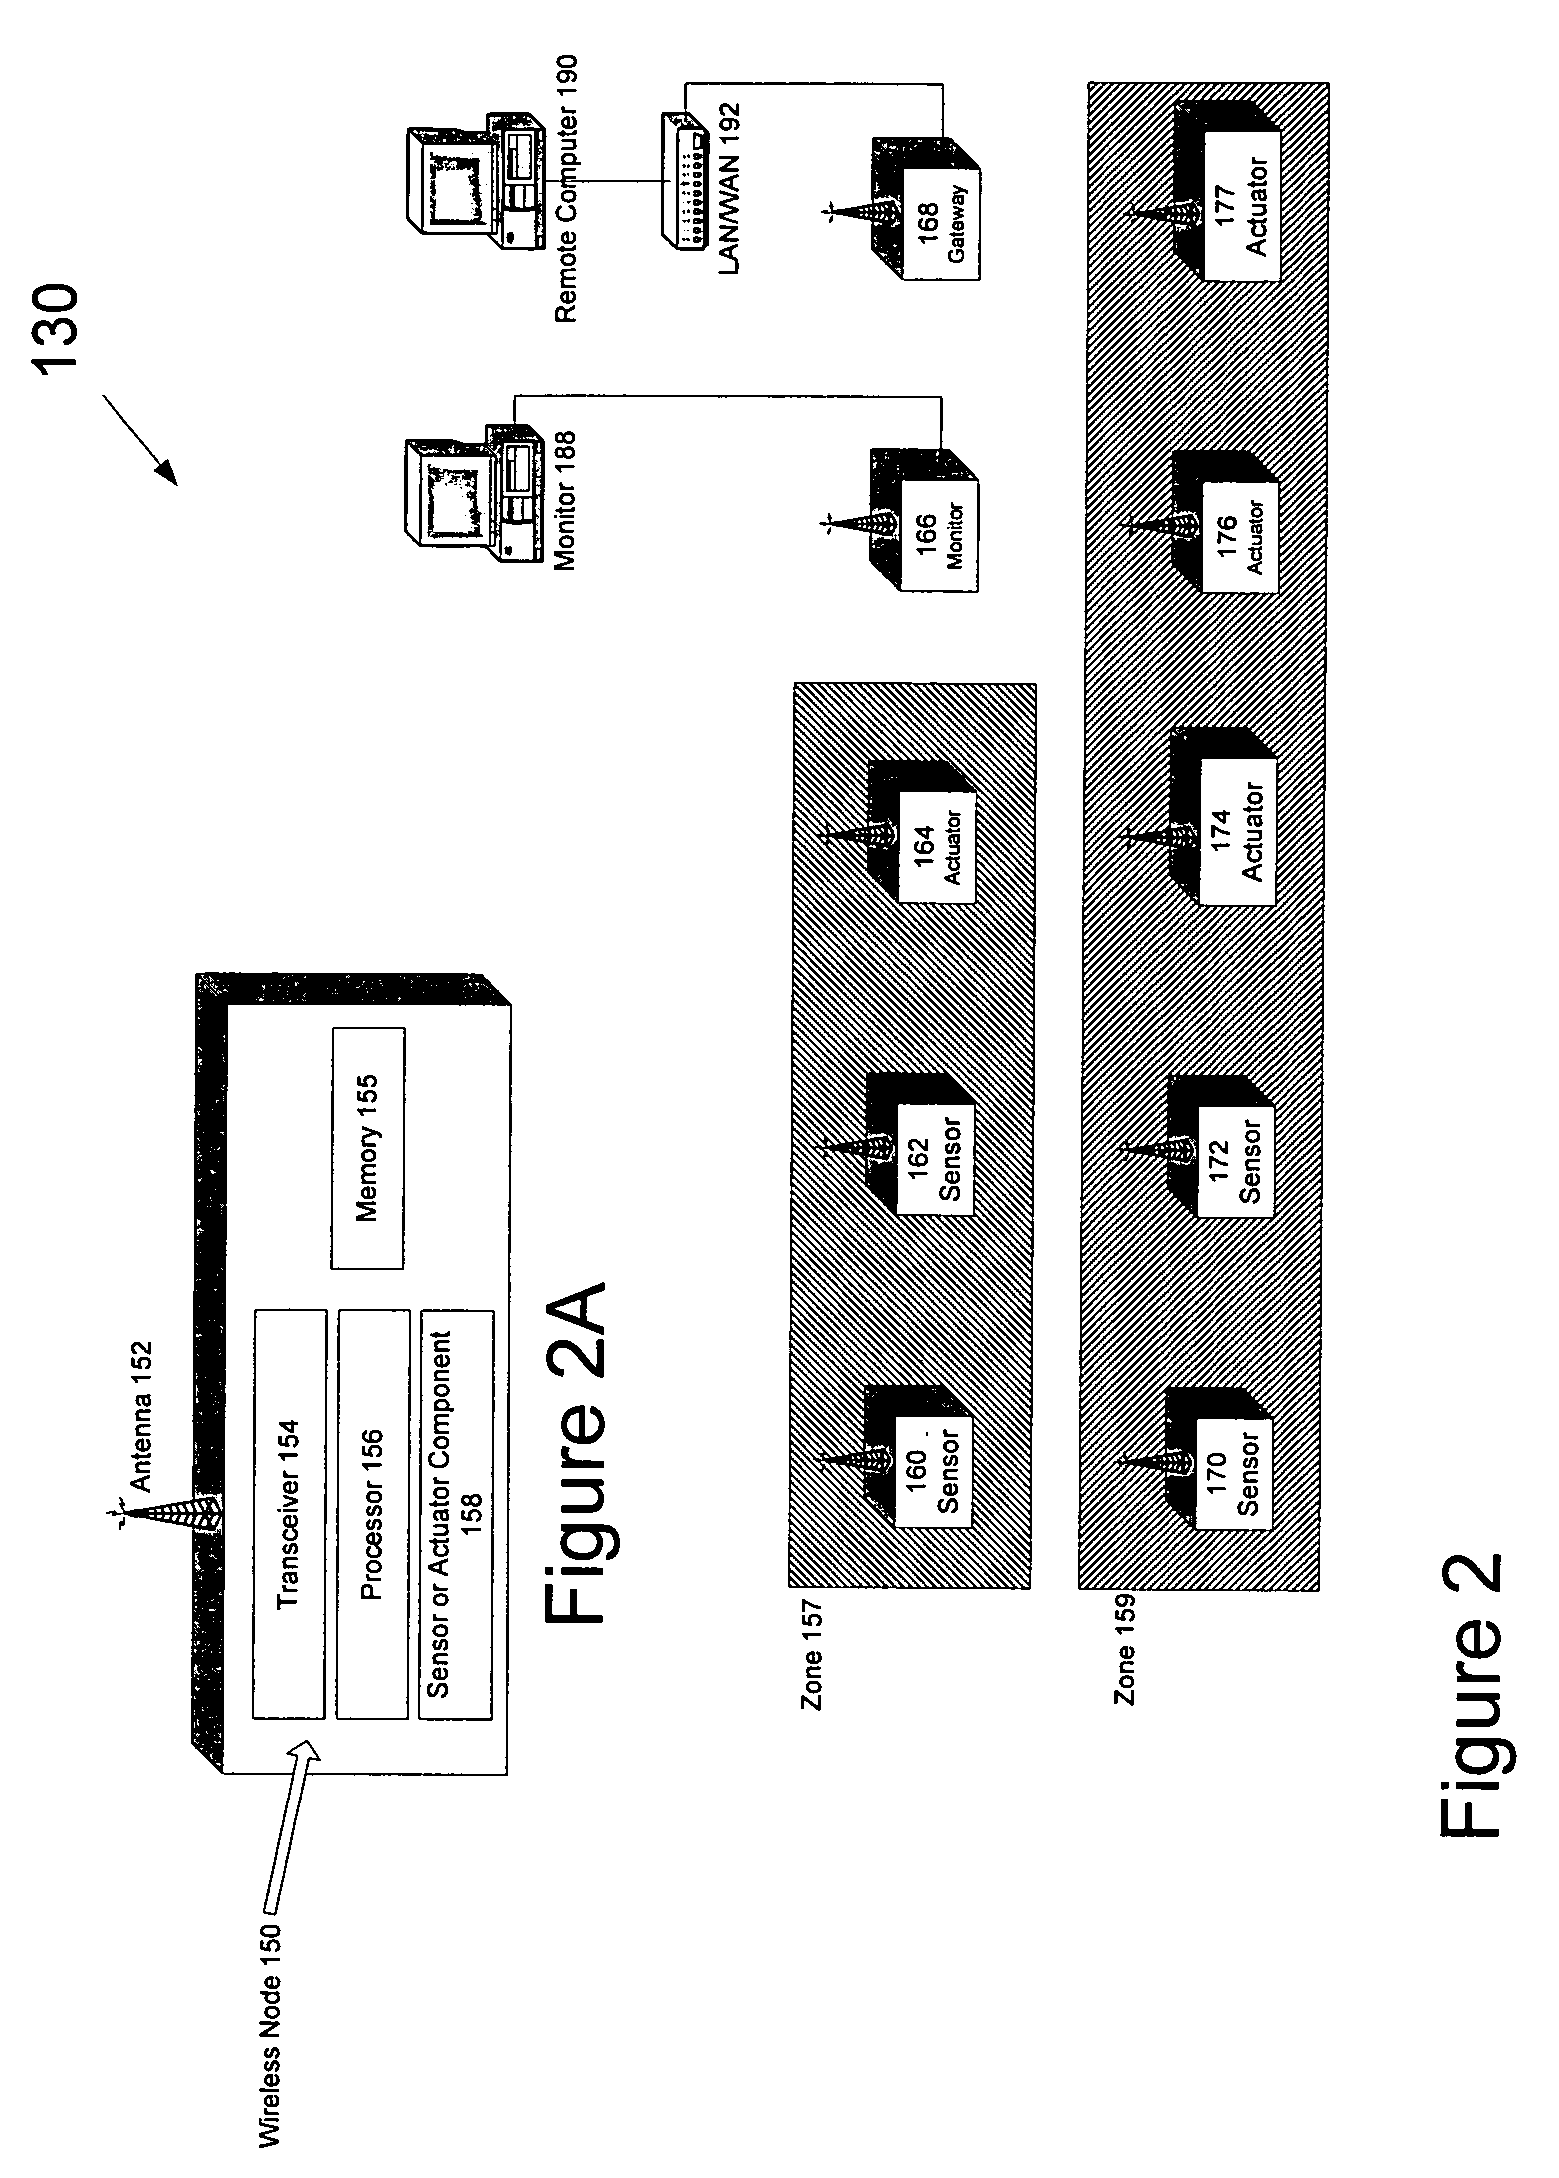 Scheduled transmission in a wireless sensor system